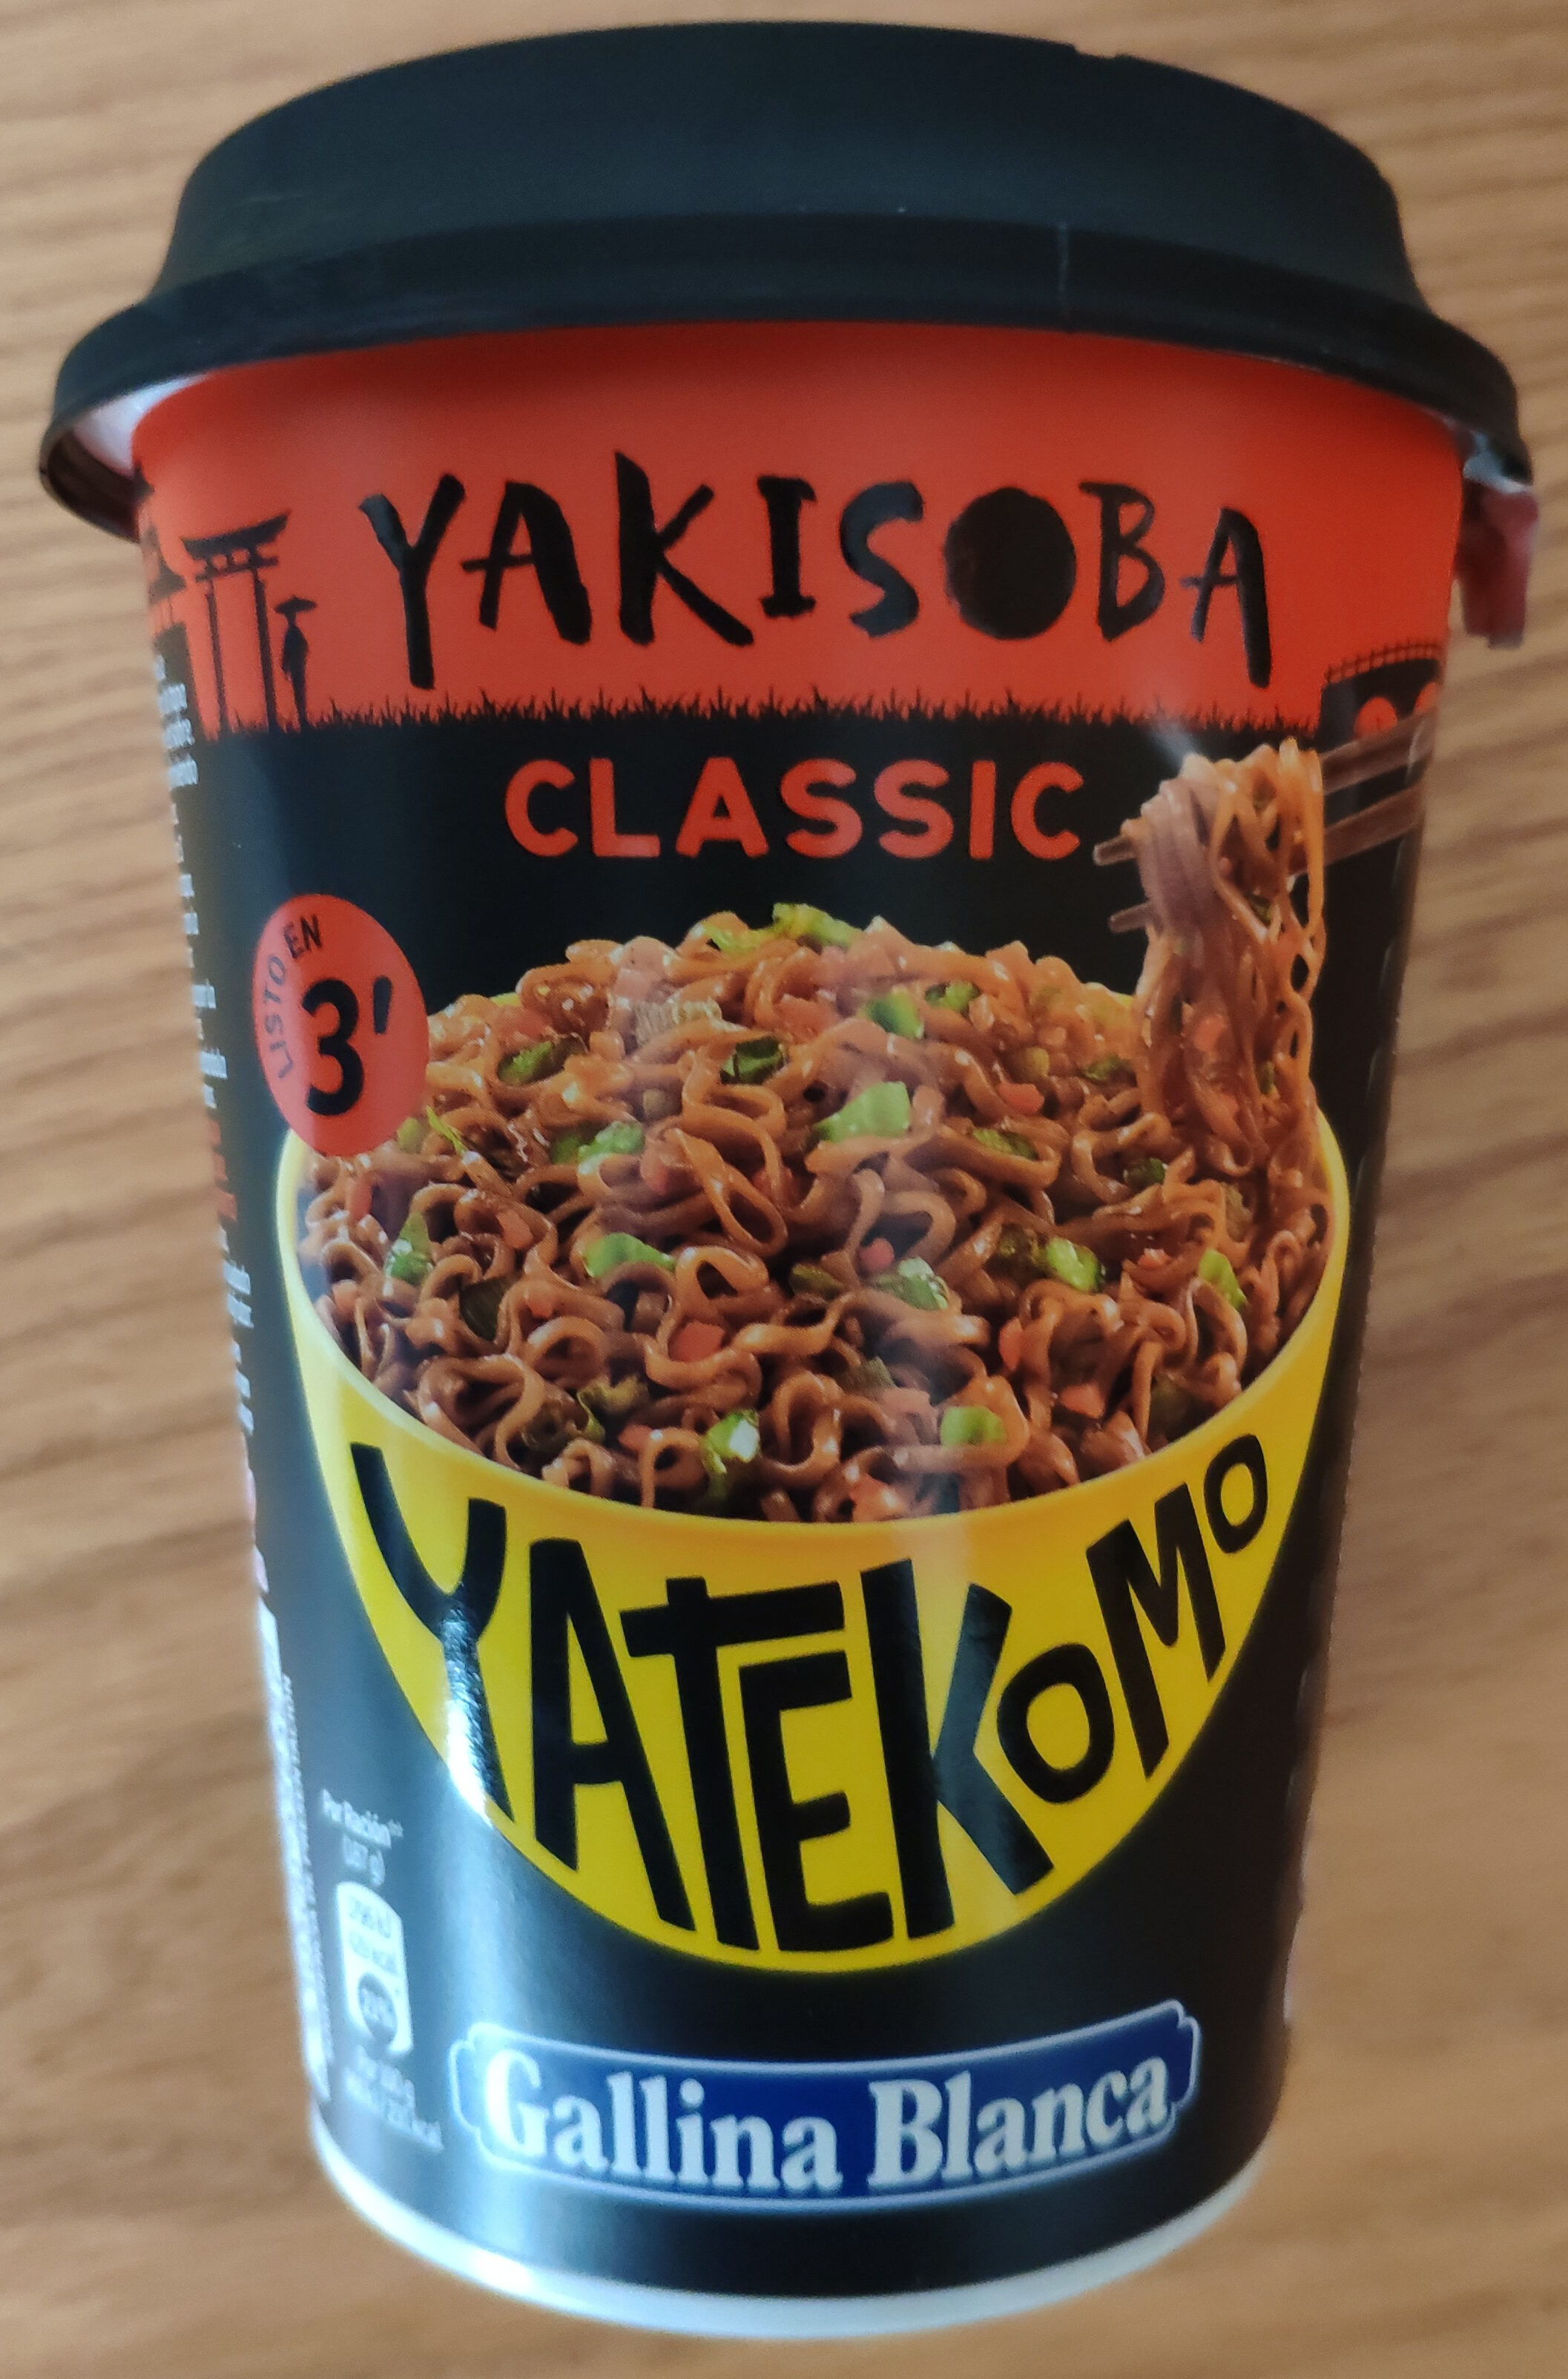 Yakisoba classic gourmet oriental - Producto